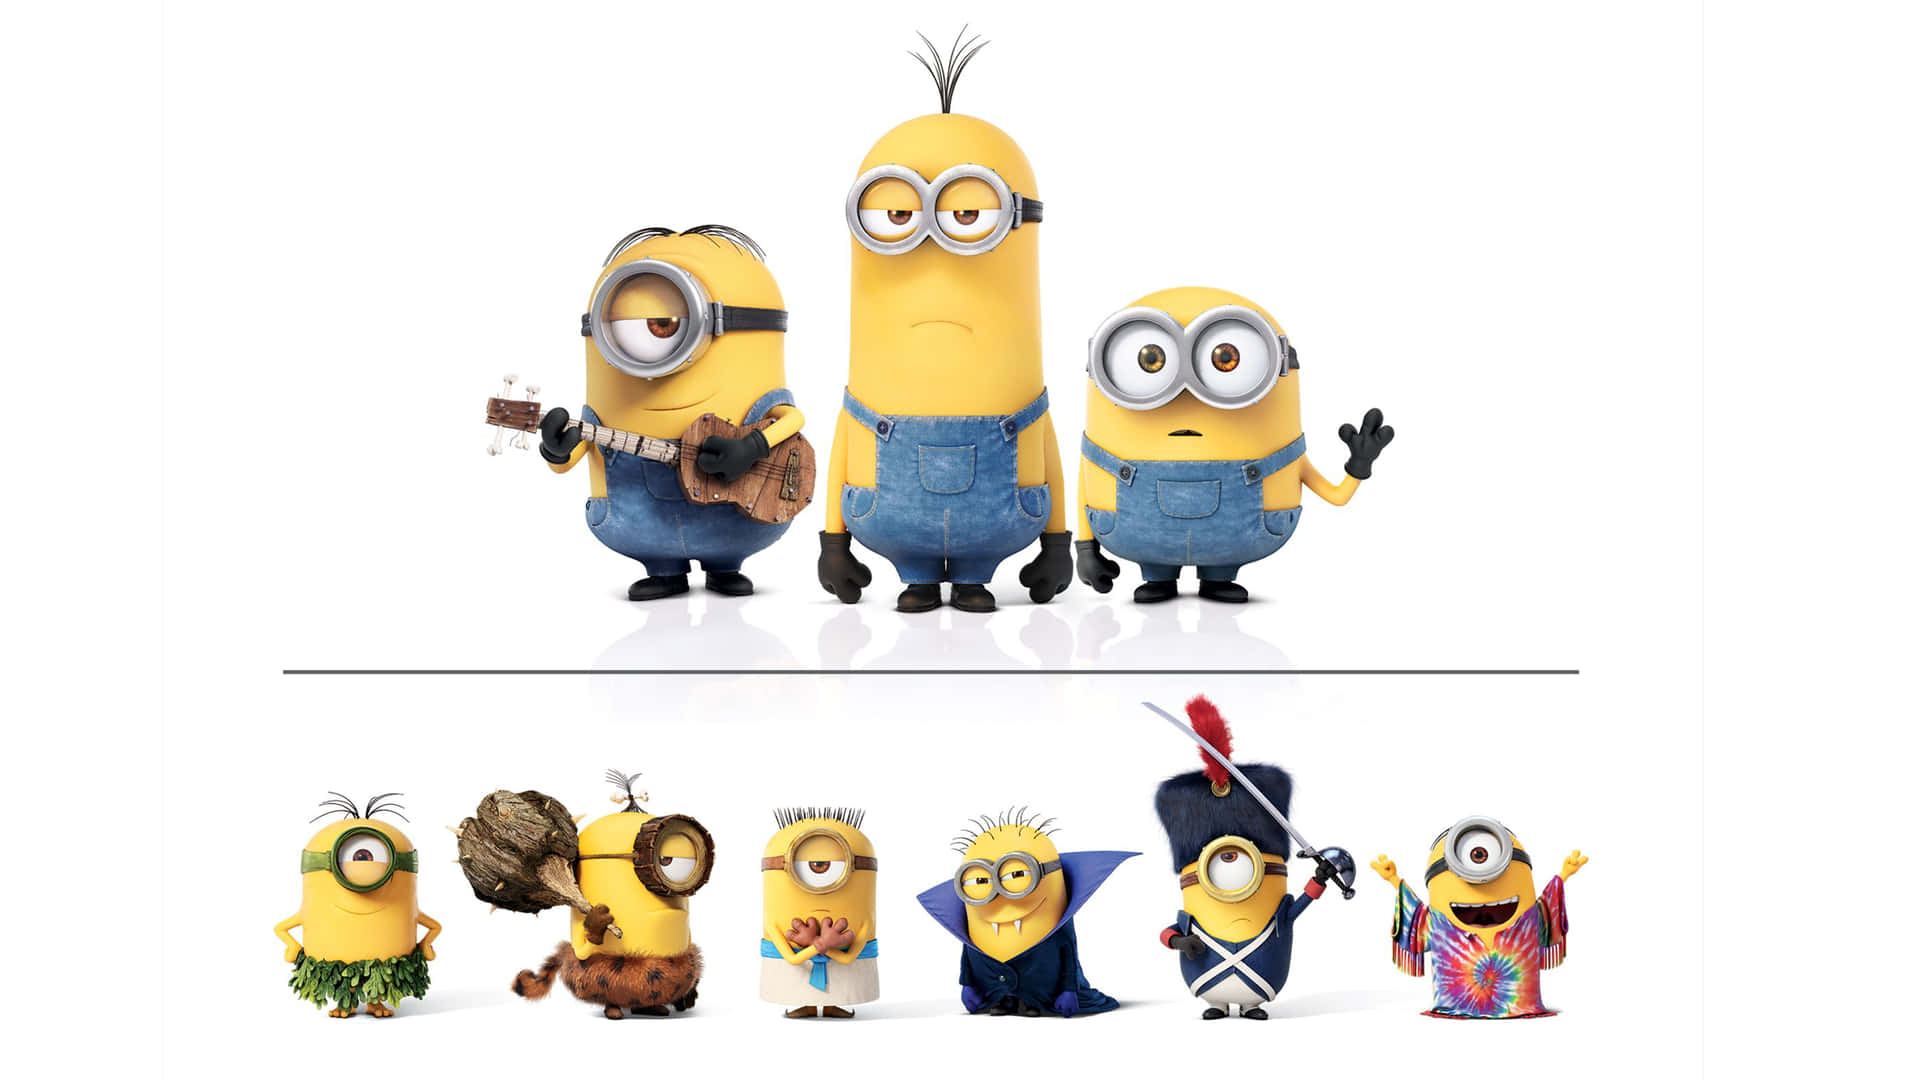 Loveable Minions